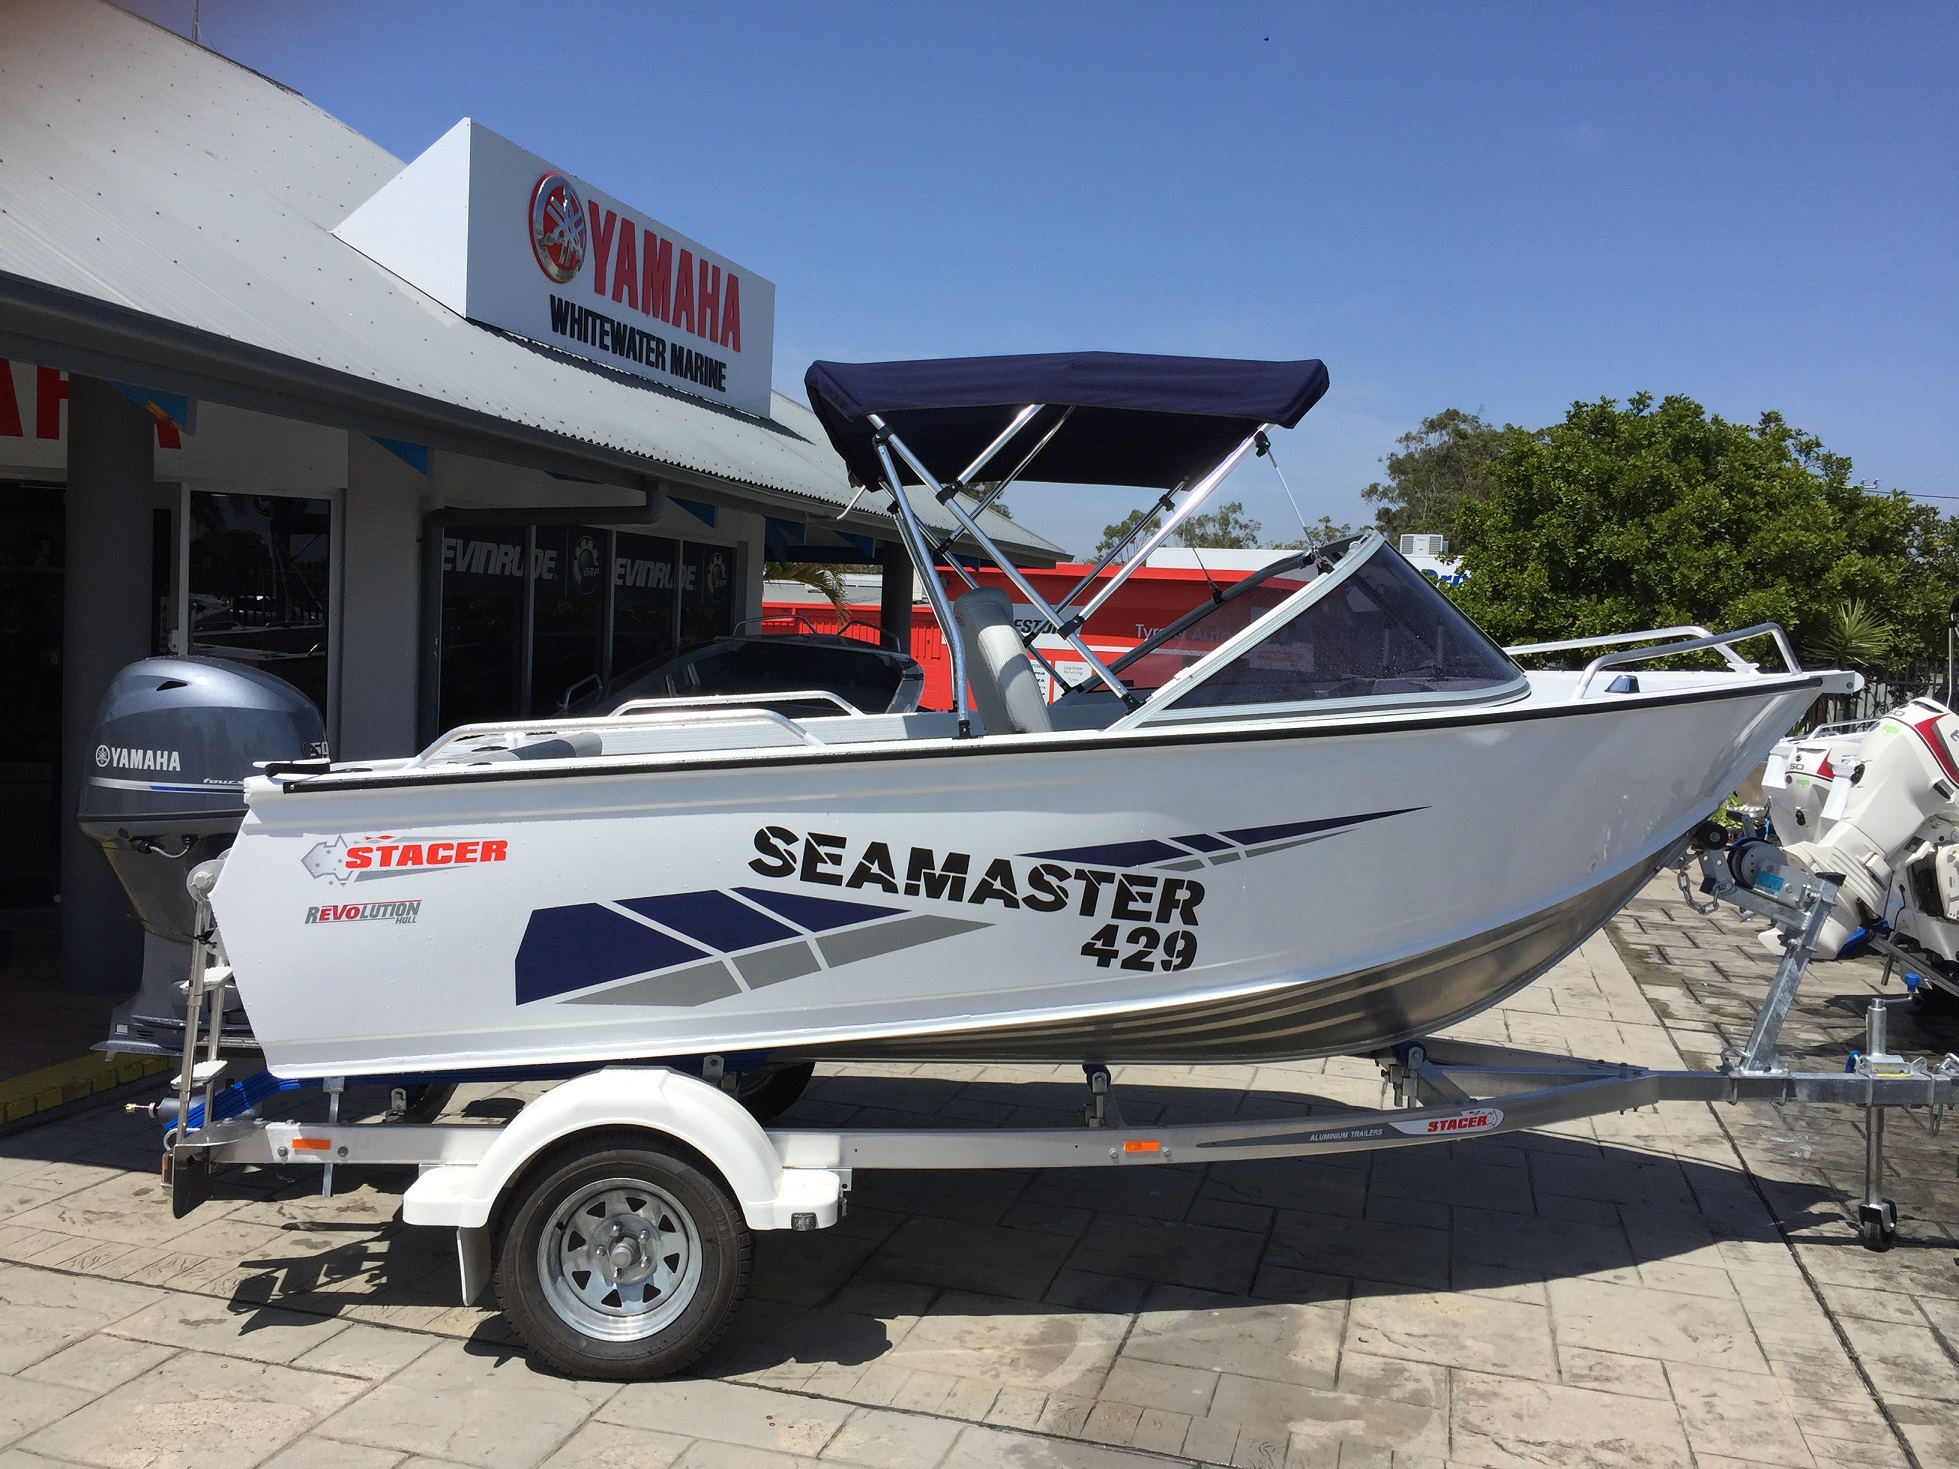 429 Sea Master | Stacer Boats for Sale | Whitewater Marine